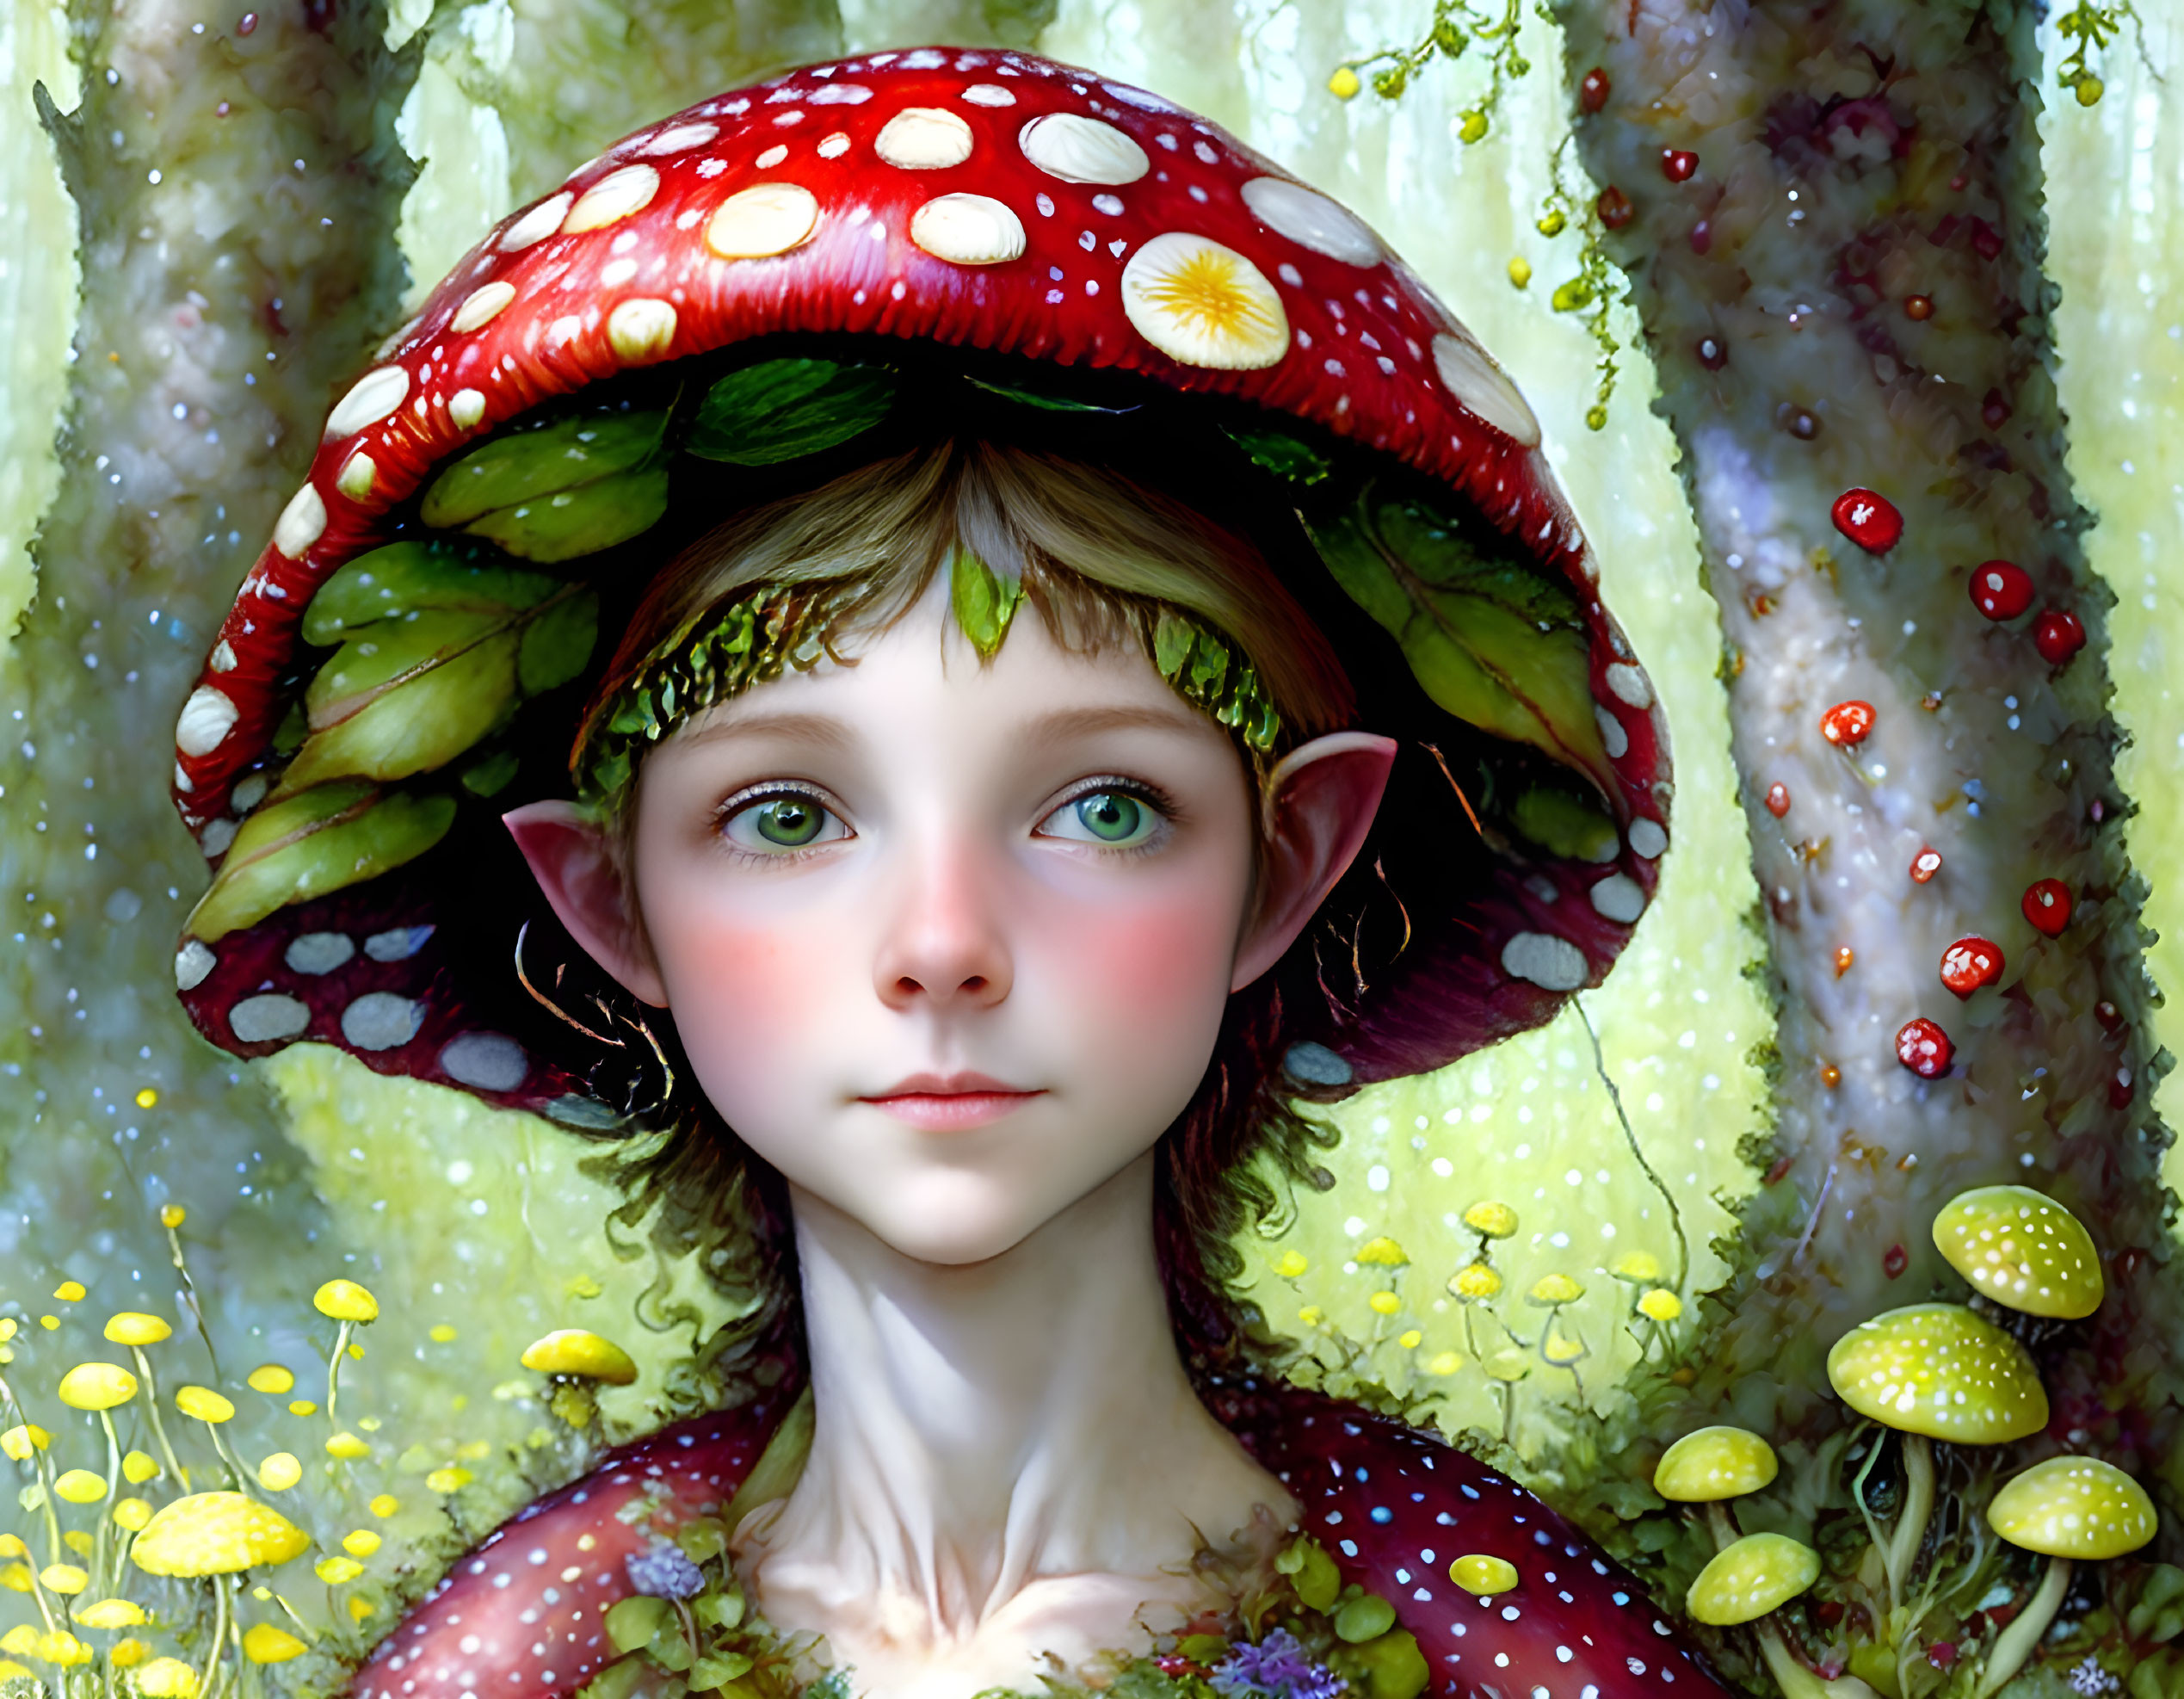 Childlike fantasy creature with mushroom cap head, green eyes, pointed ears, forest backdrop.